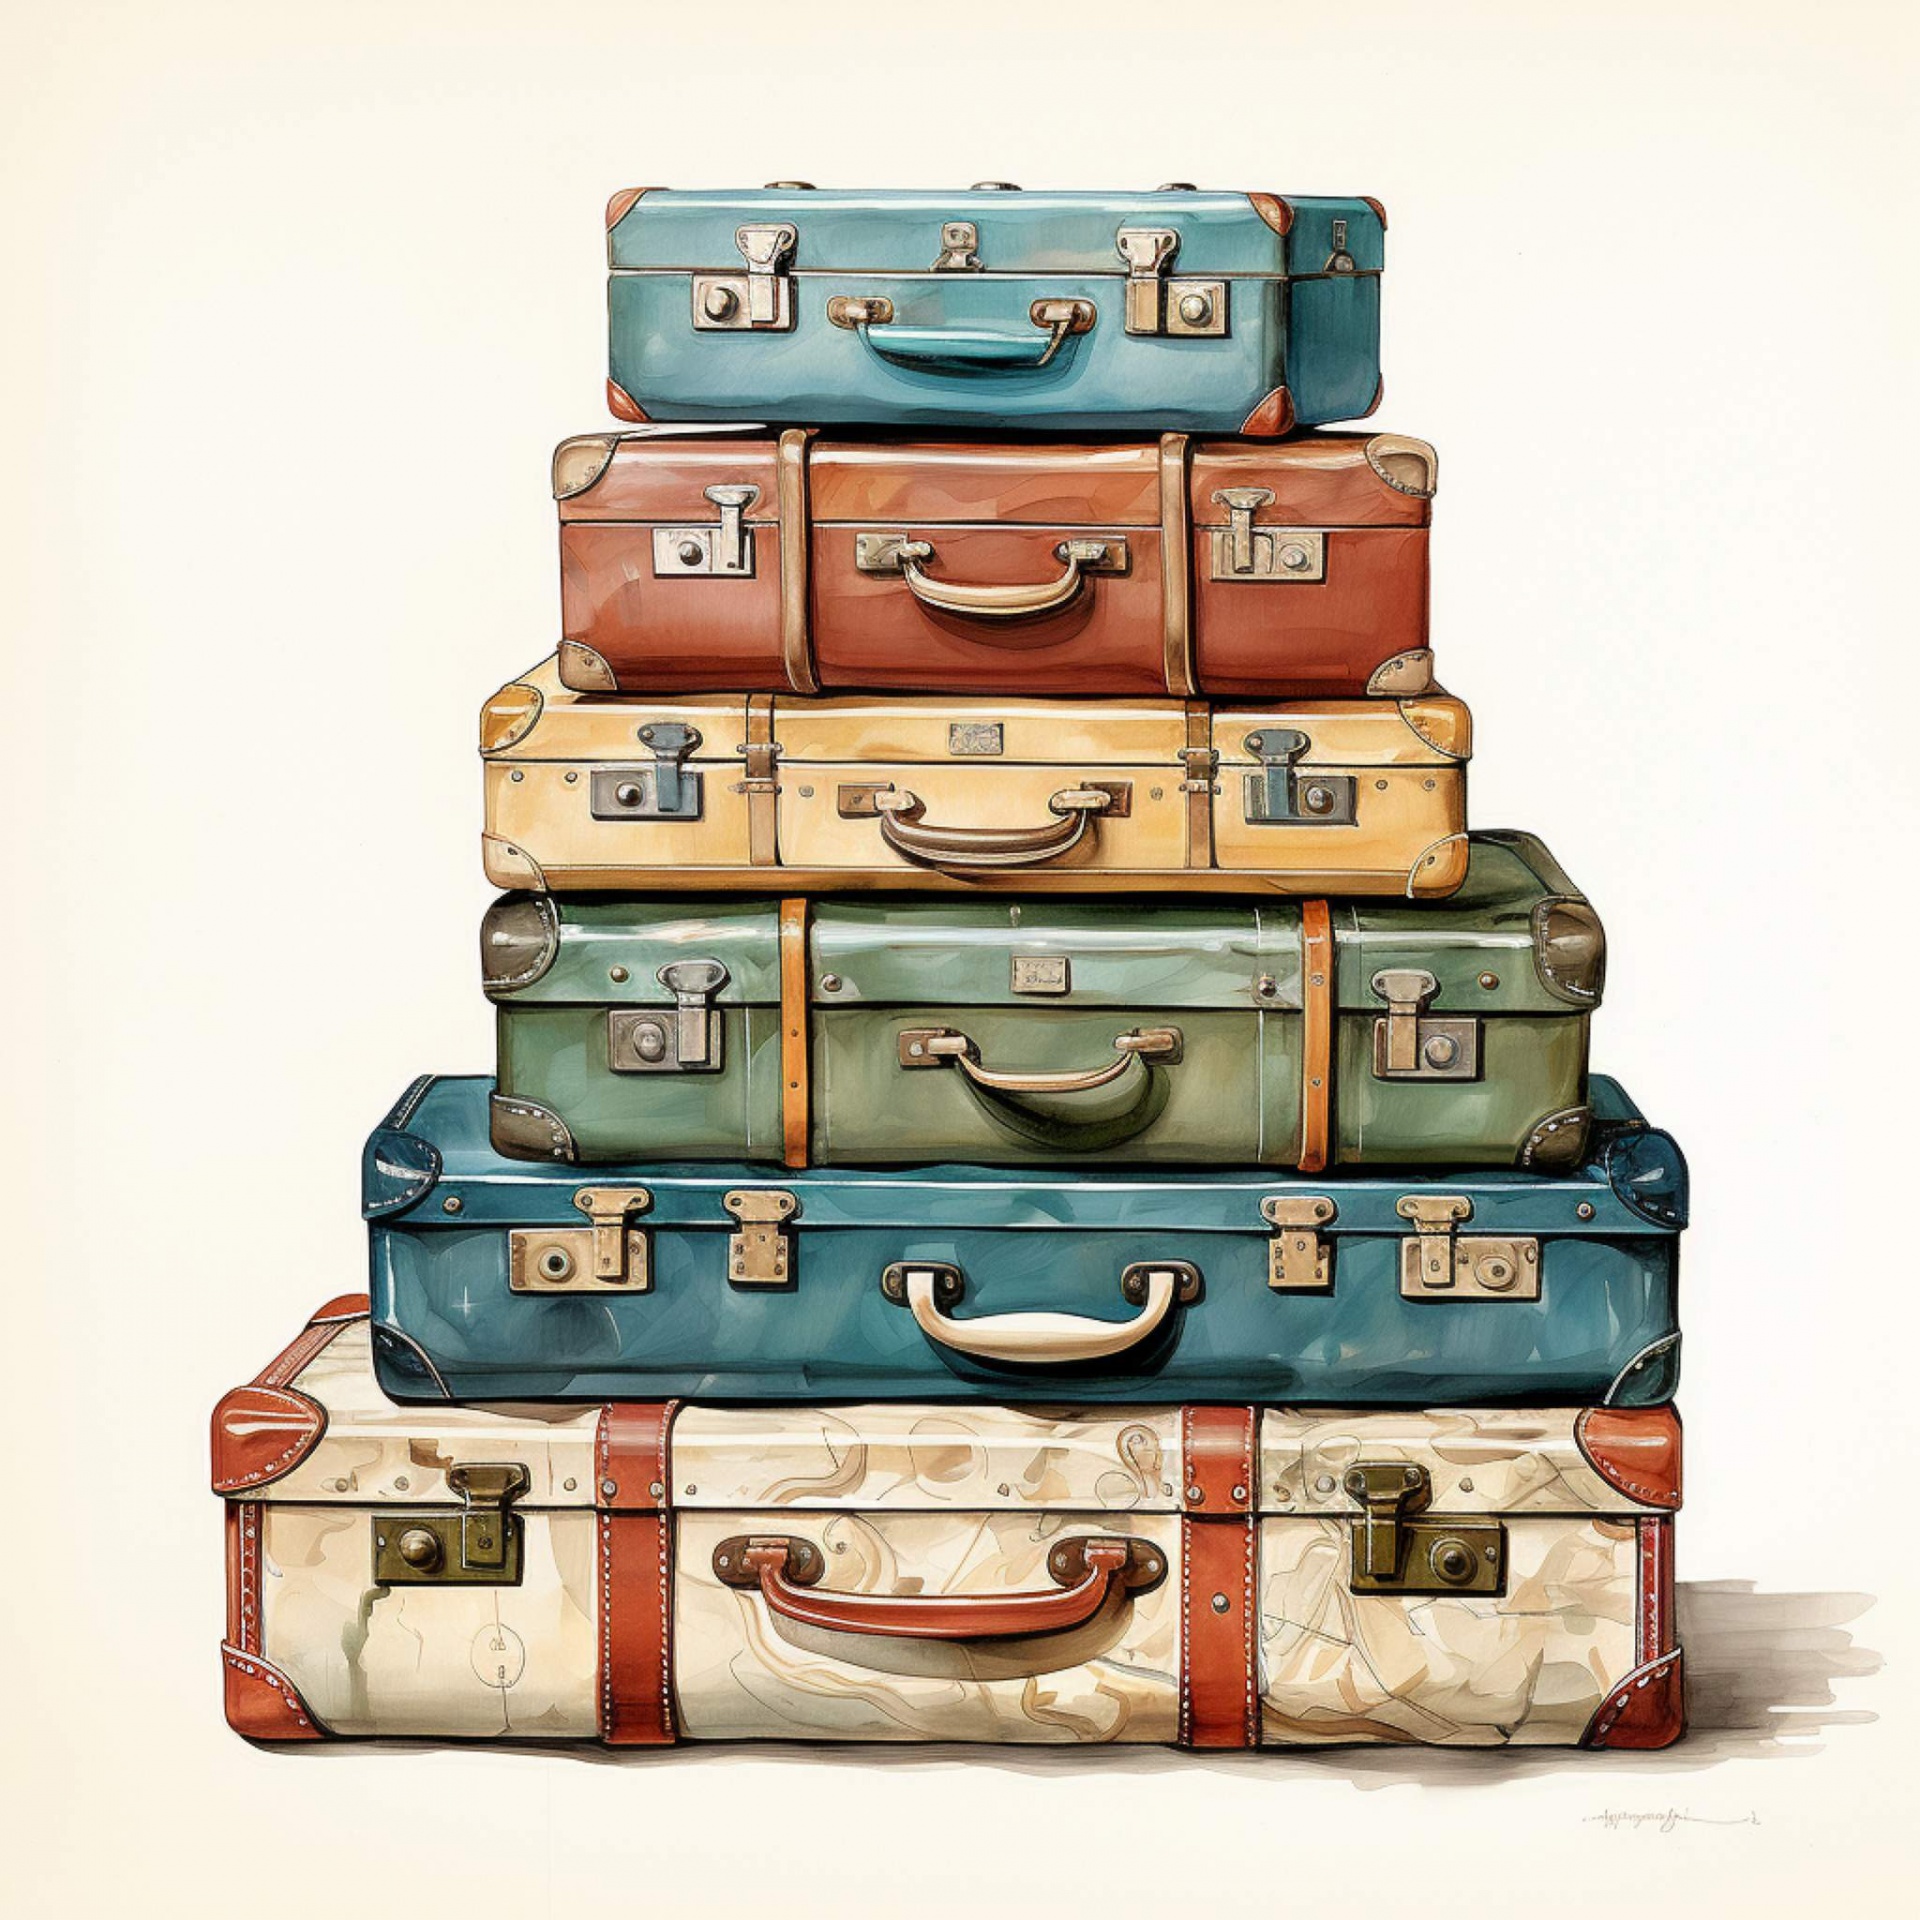 Vintage Travel Luggage Free Stock Photo - Public Domain Pictures